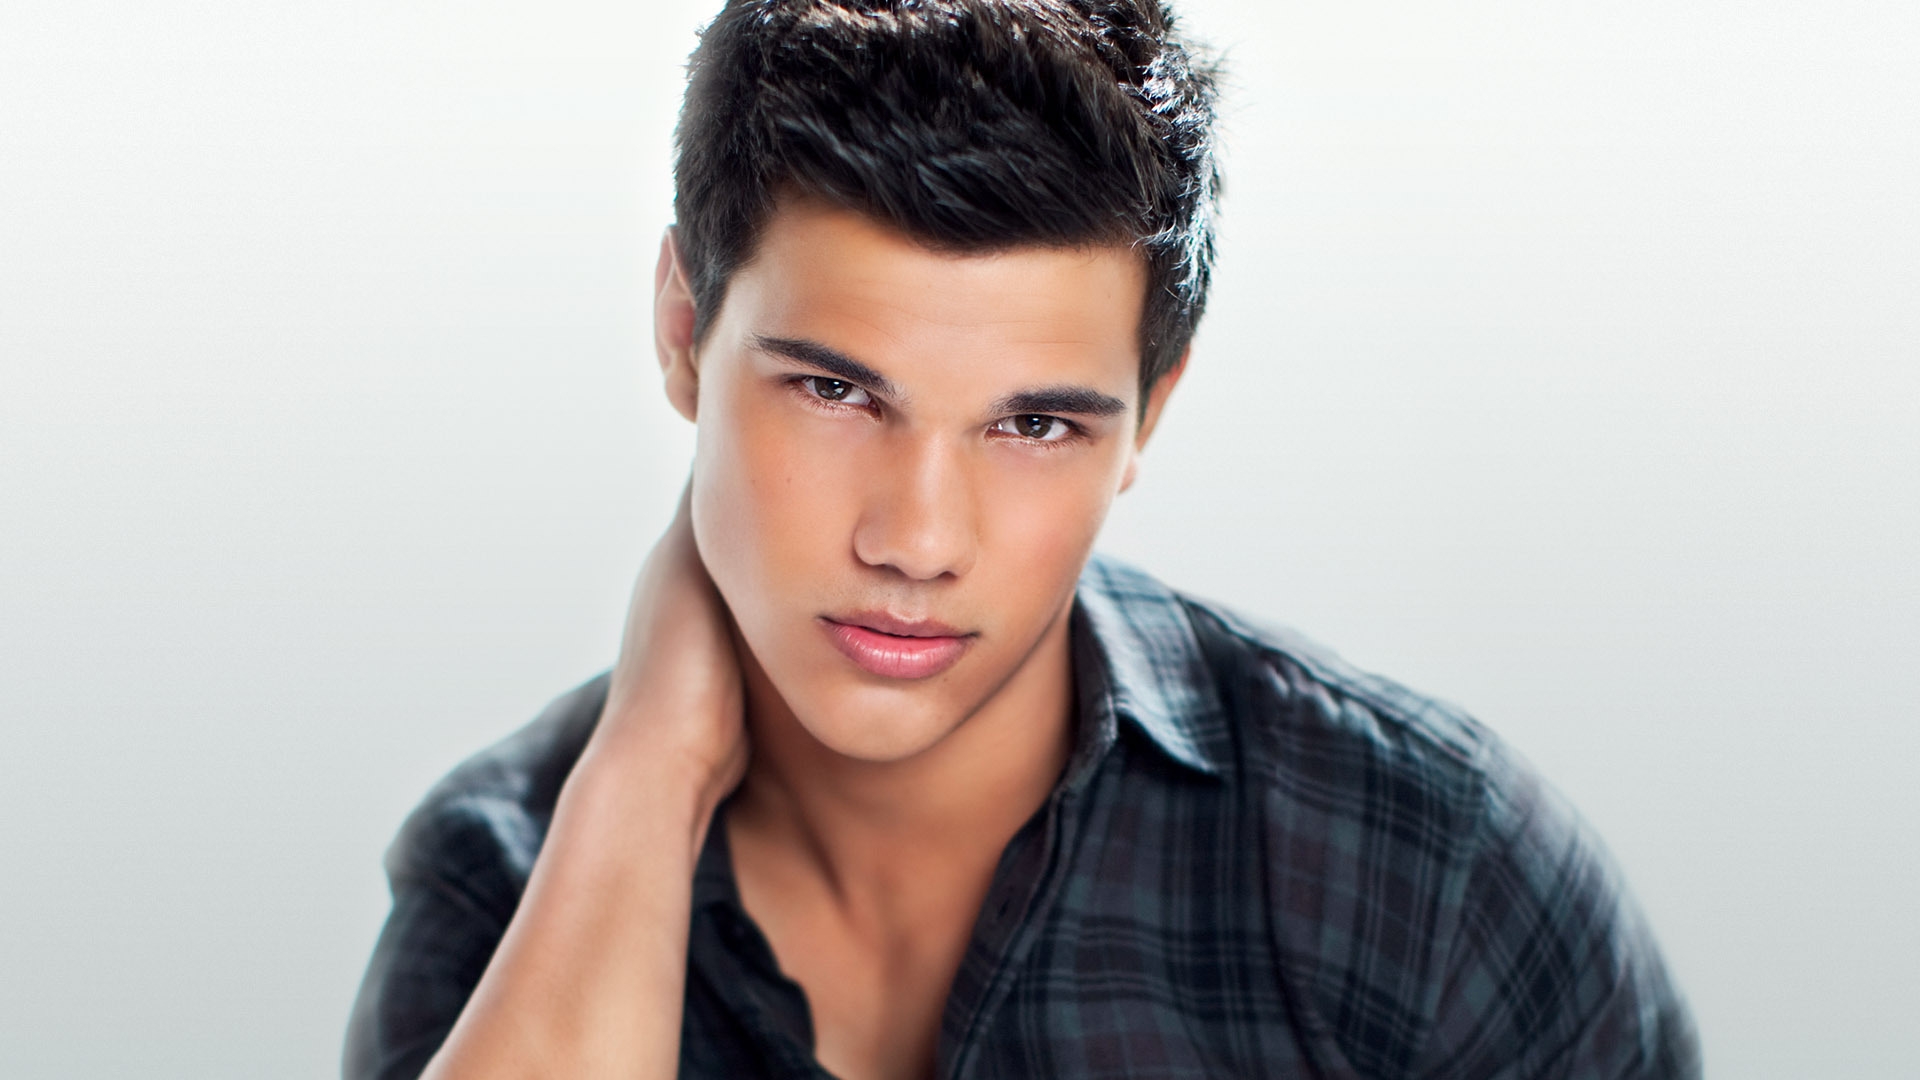 Taylor Lautner Actor for 1920 x 1080 HDTV 1080p resolution